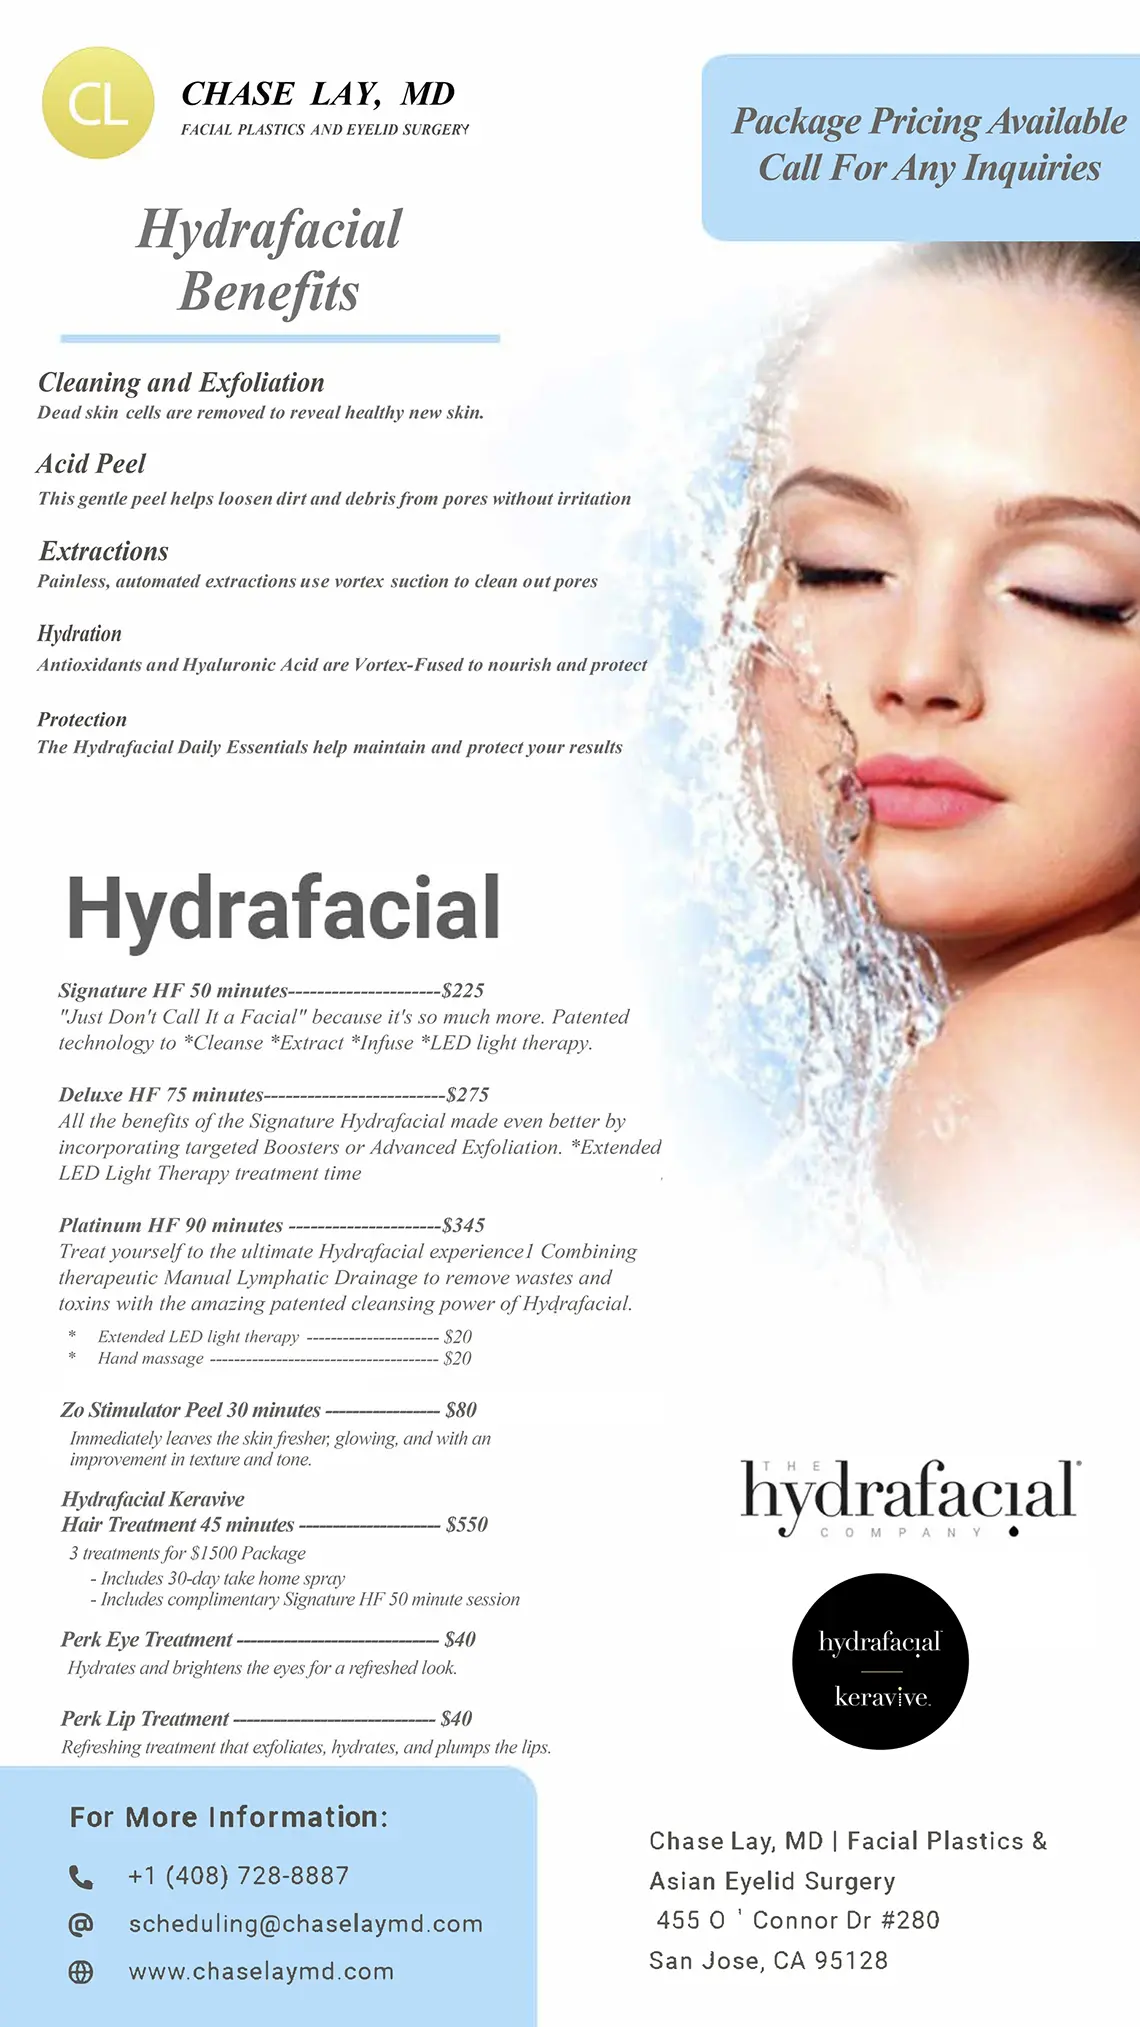 Chase Lay Hydrafacial Promotion